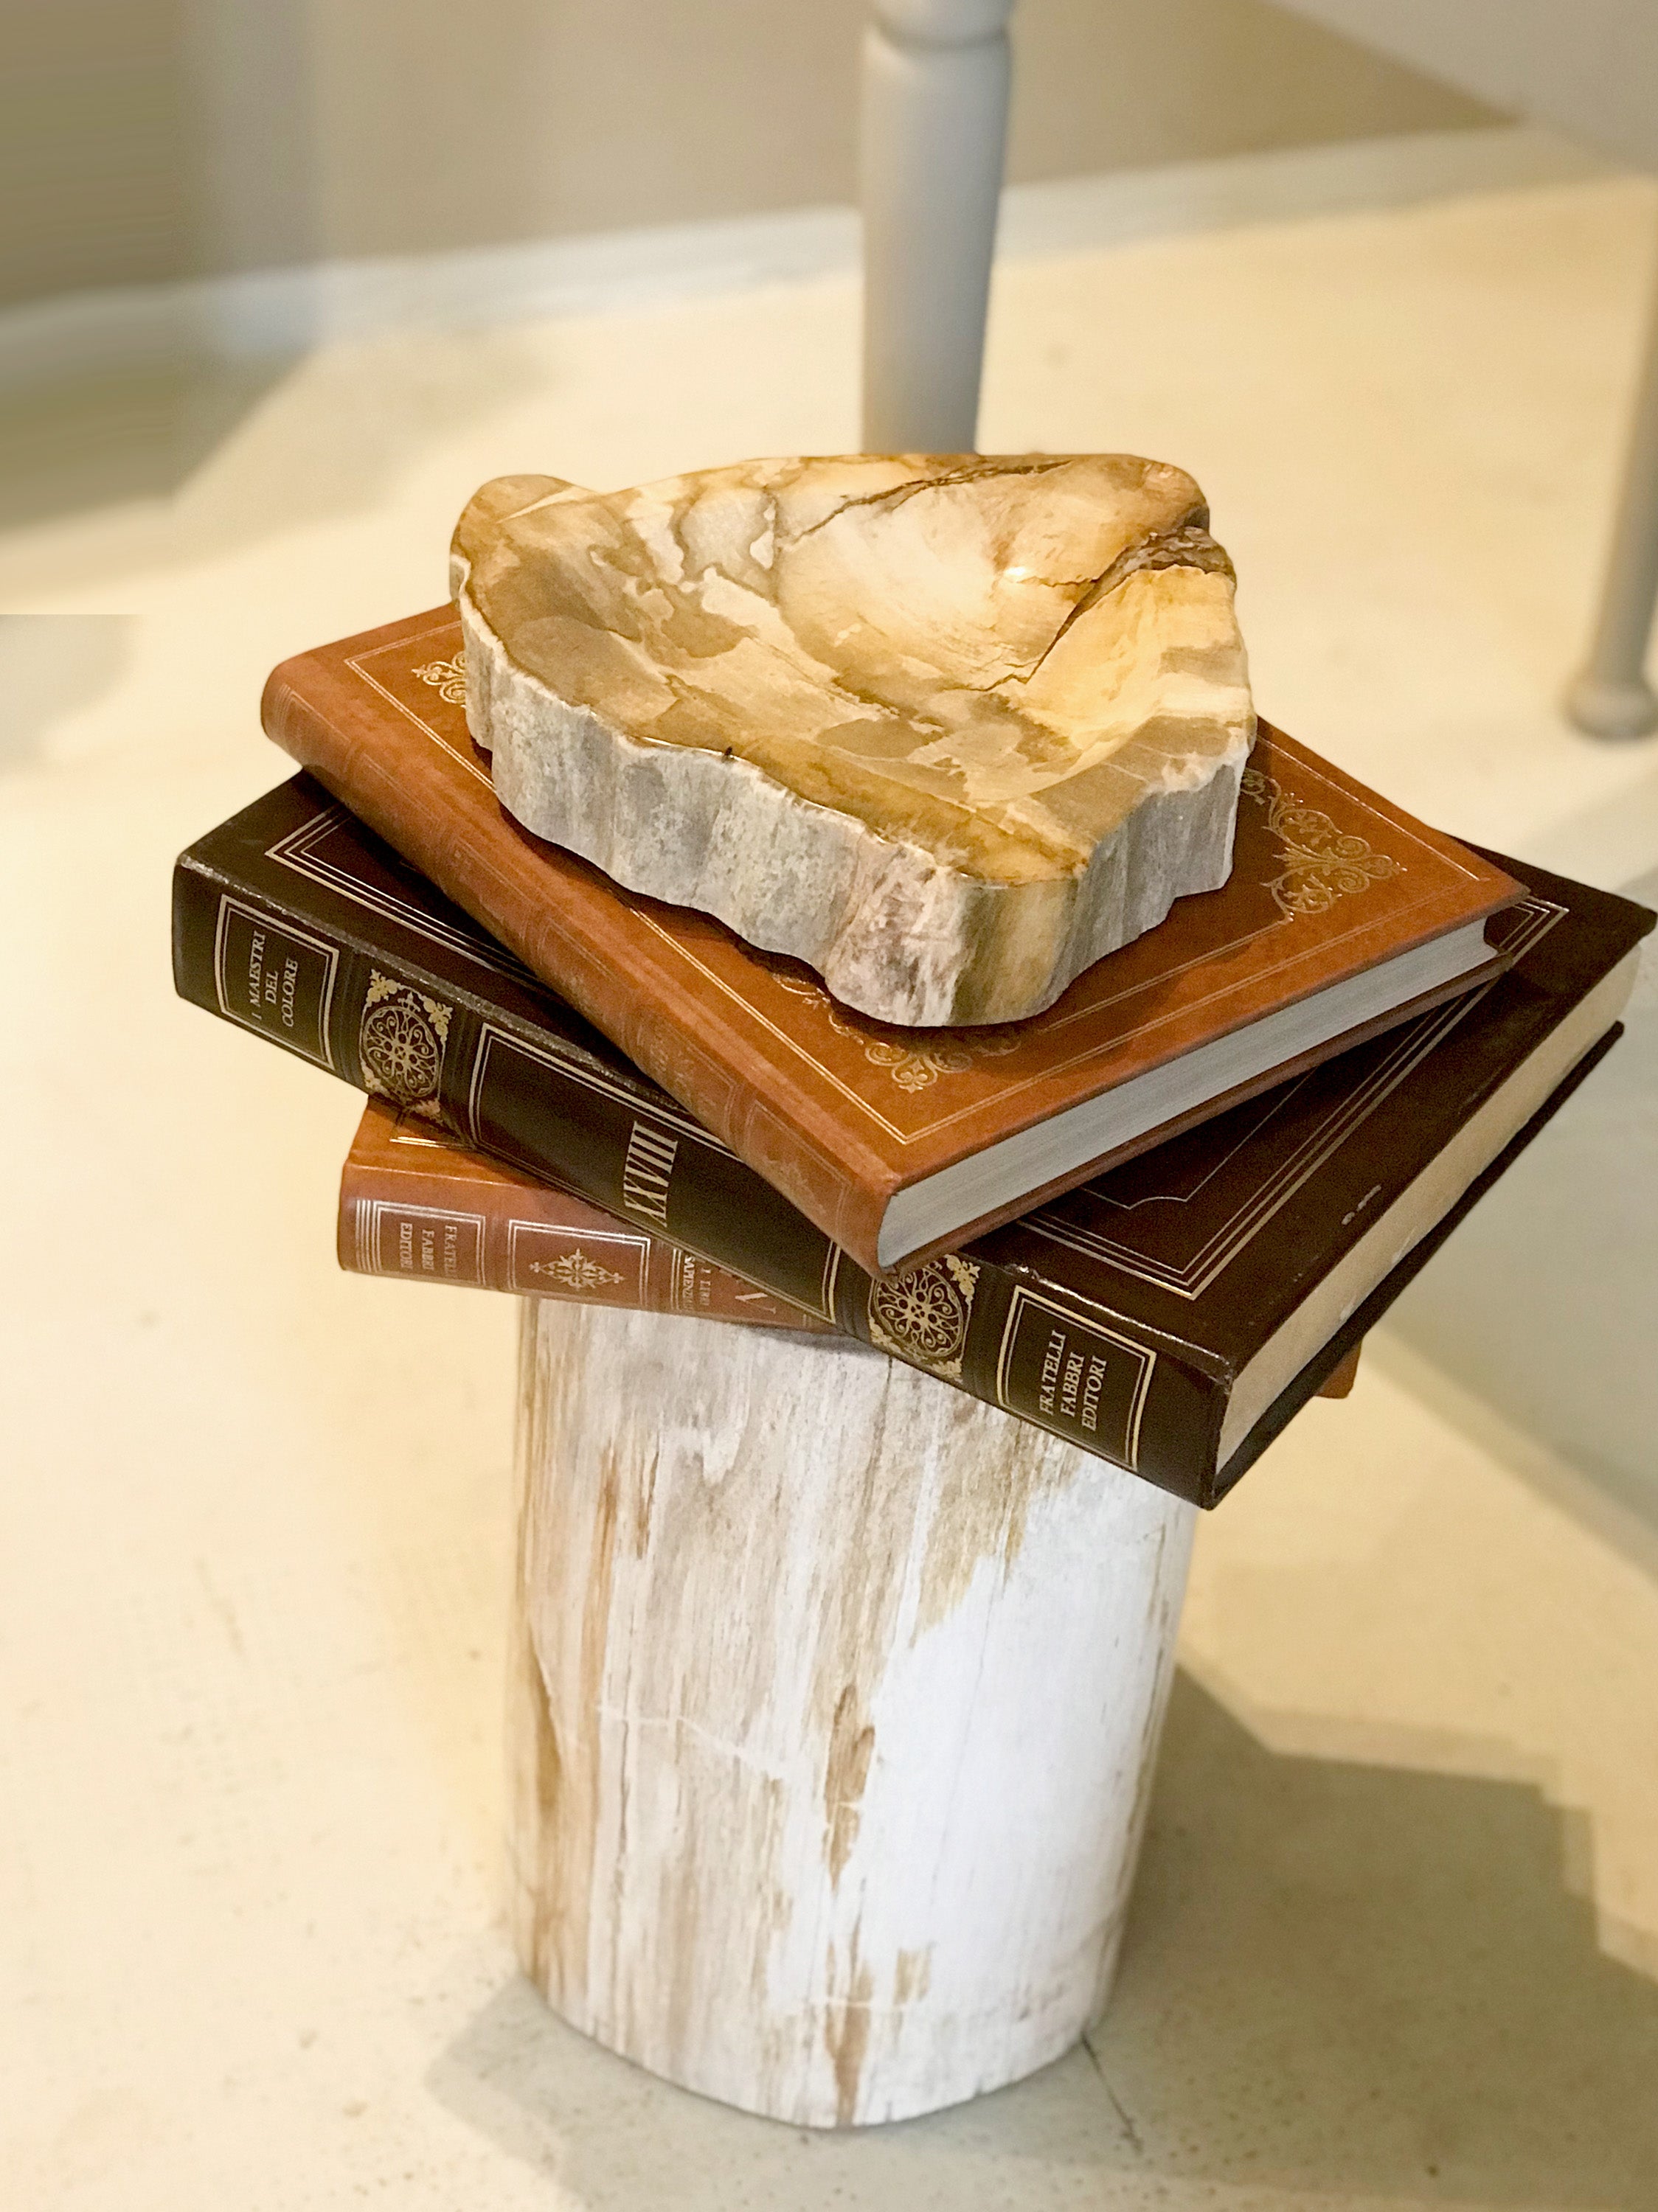 Petrified Wood Bowl - Enjoy Italy's largest collection of Petrified wood accessories!